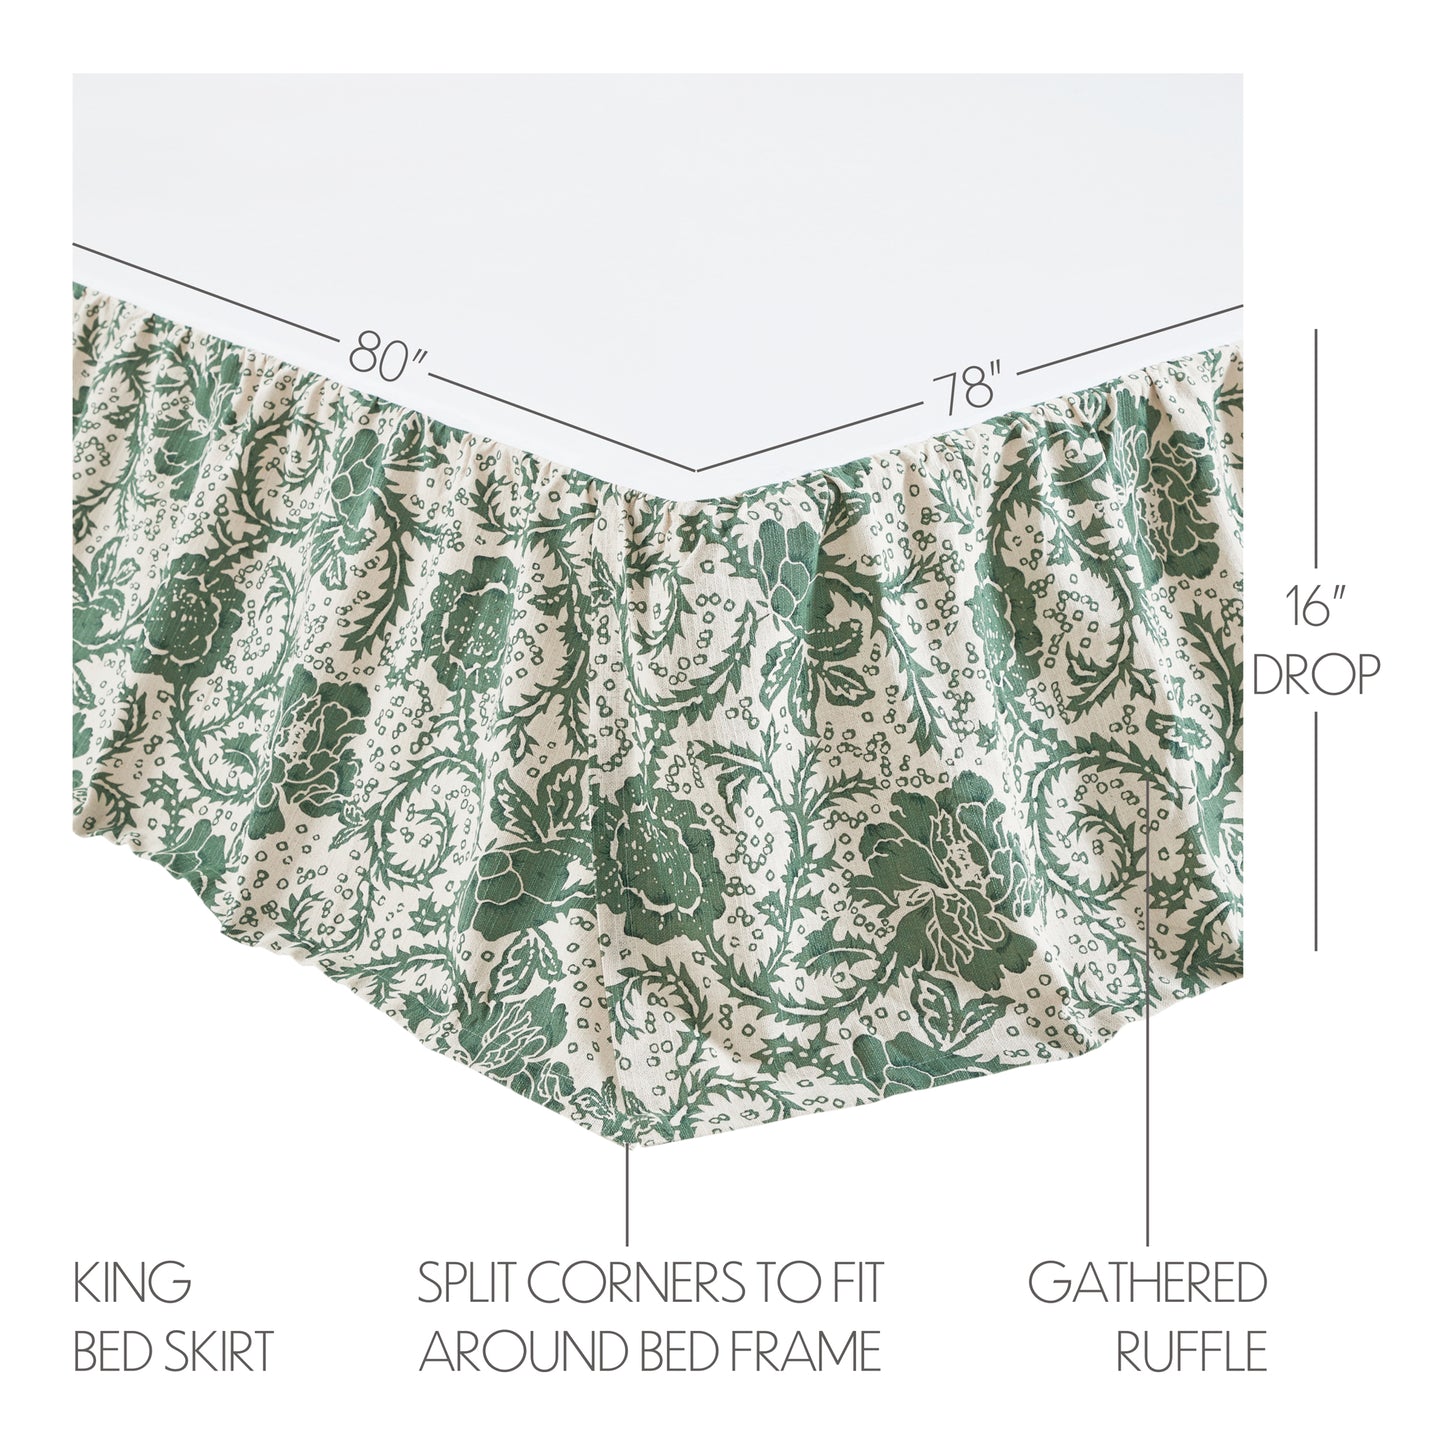 81214-Dorset-Green-Floral-King-Bed-Skirt-78x80x16-image-1